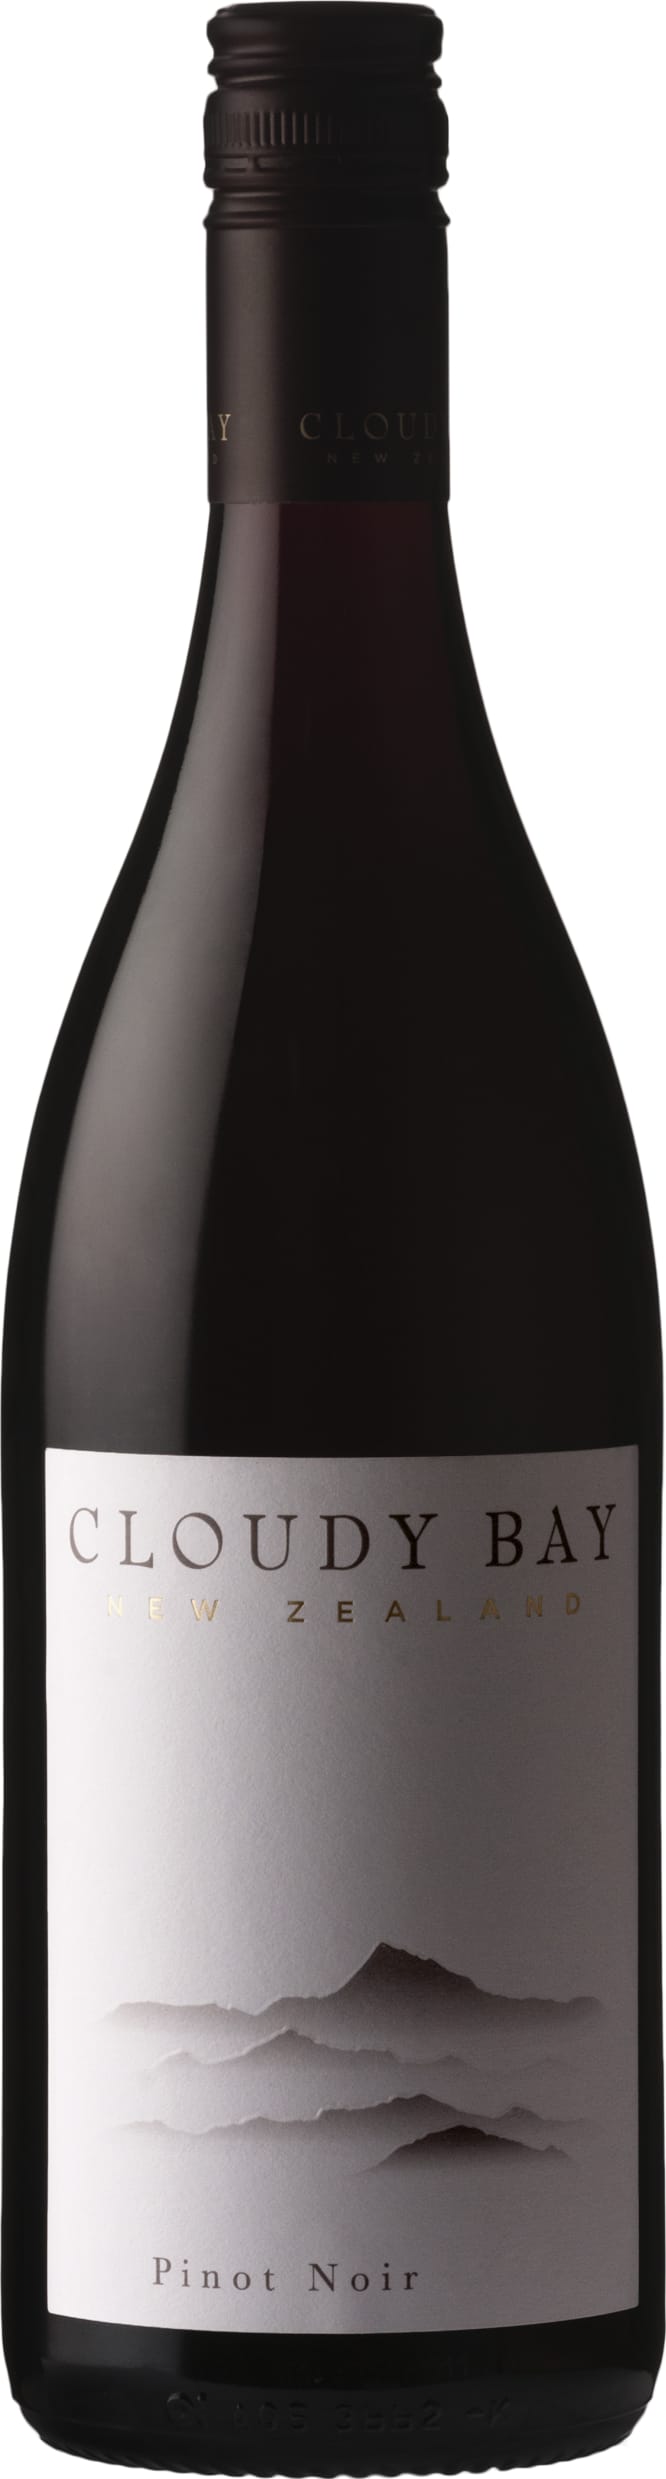 Cloudy Bay Pinot Noir 2021 75cl - Buy Cloudy Bay Wines from GREAT WINES DIRECT wine shop